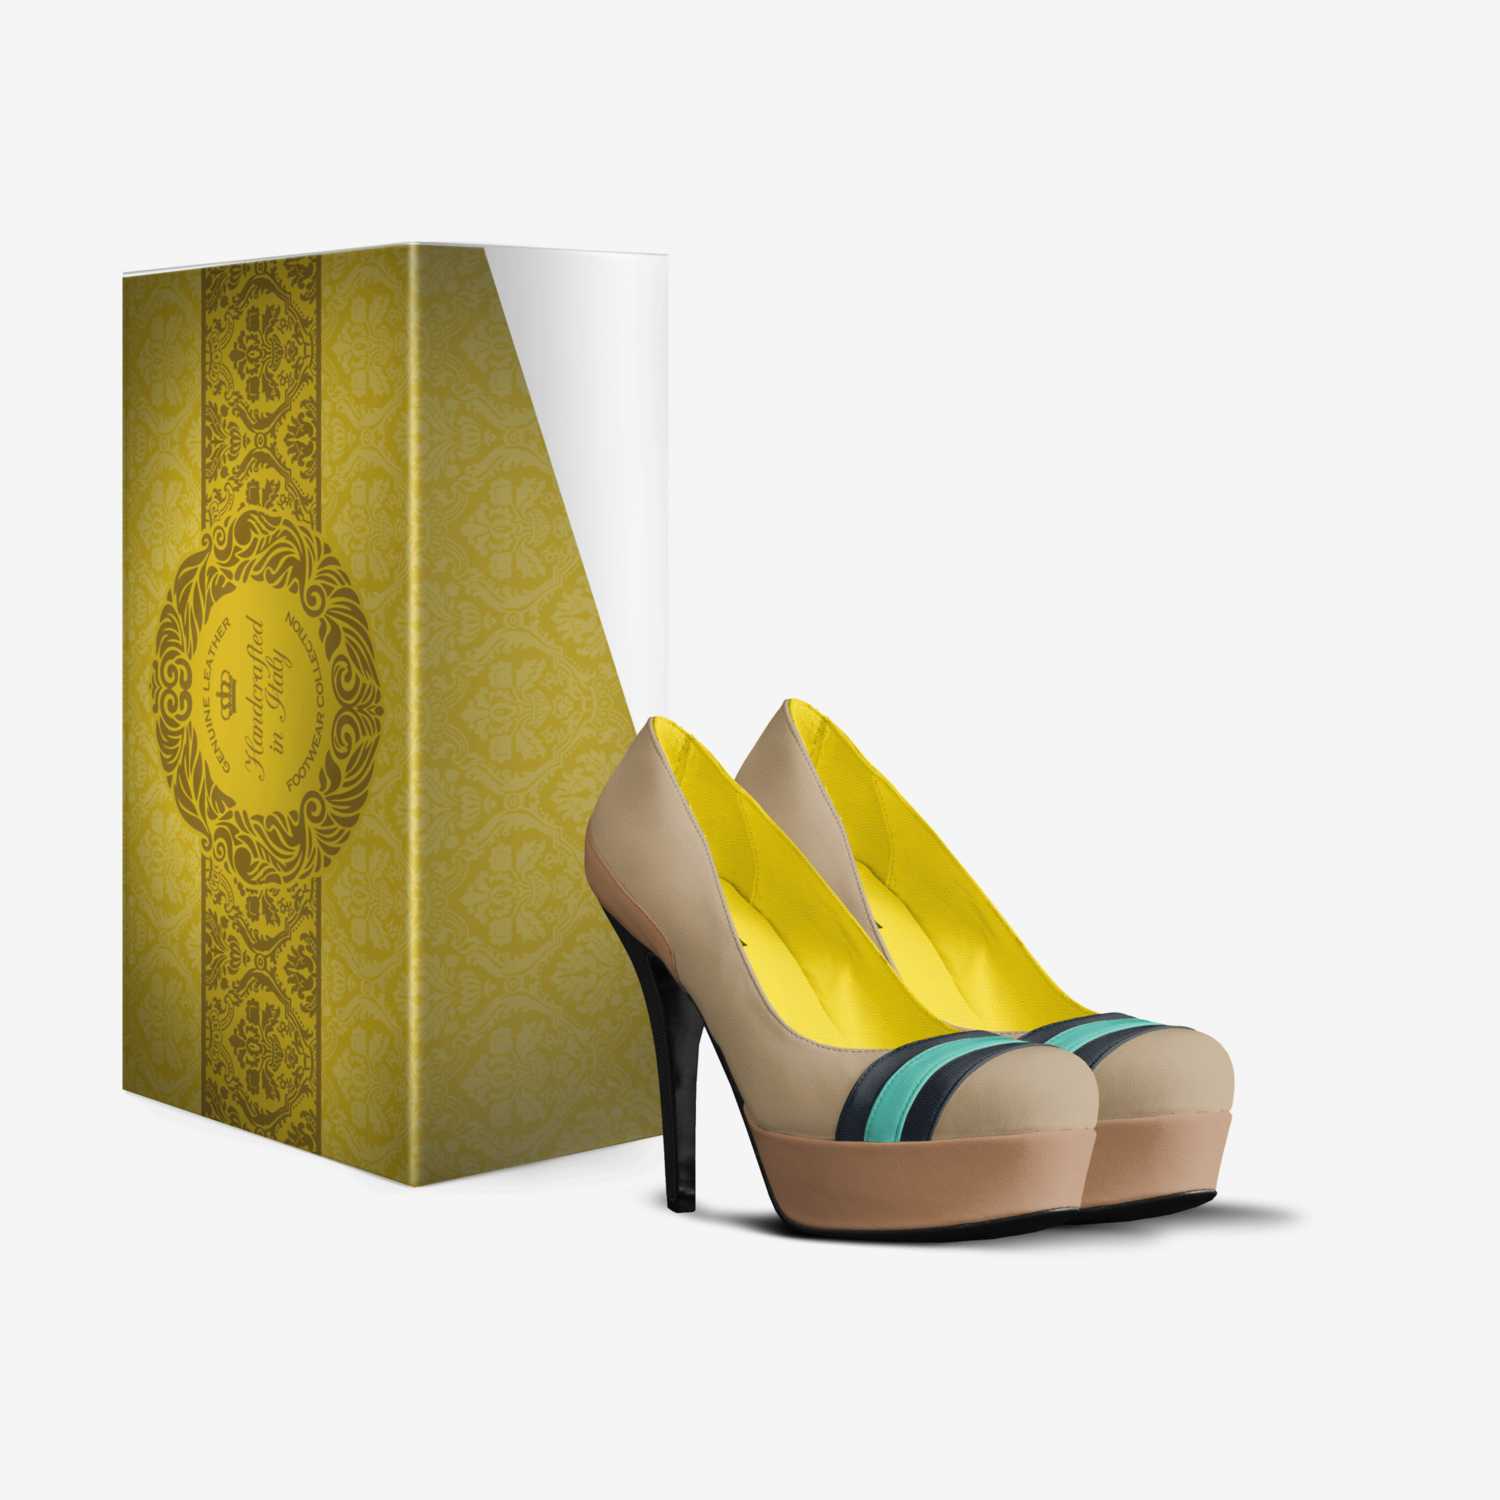 Lucille XO custom made in Italy shoes by Michelle Campbell | Box view